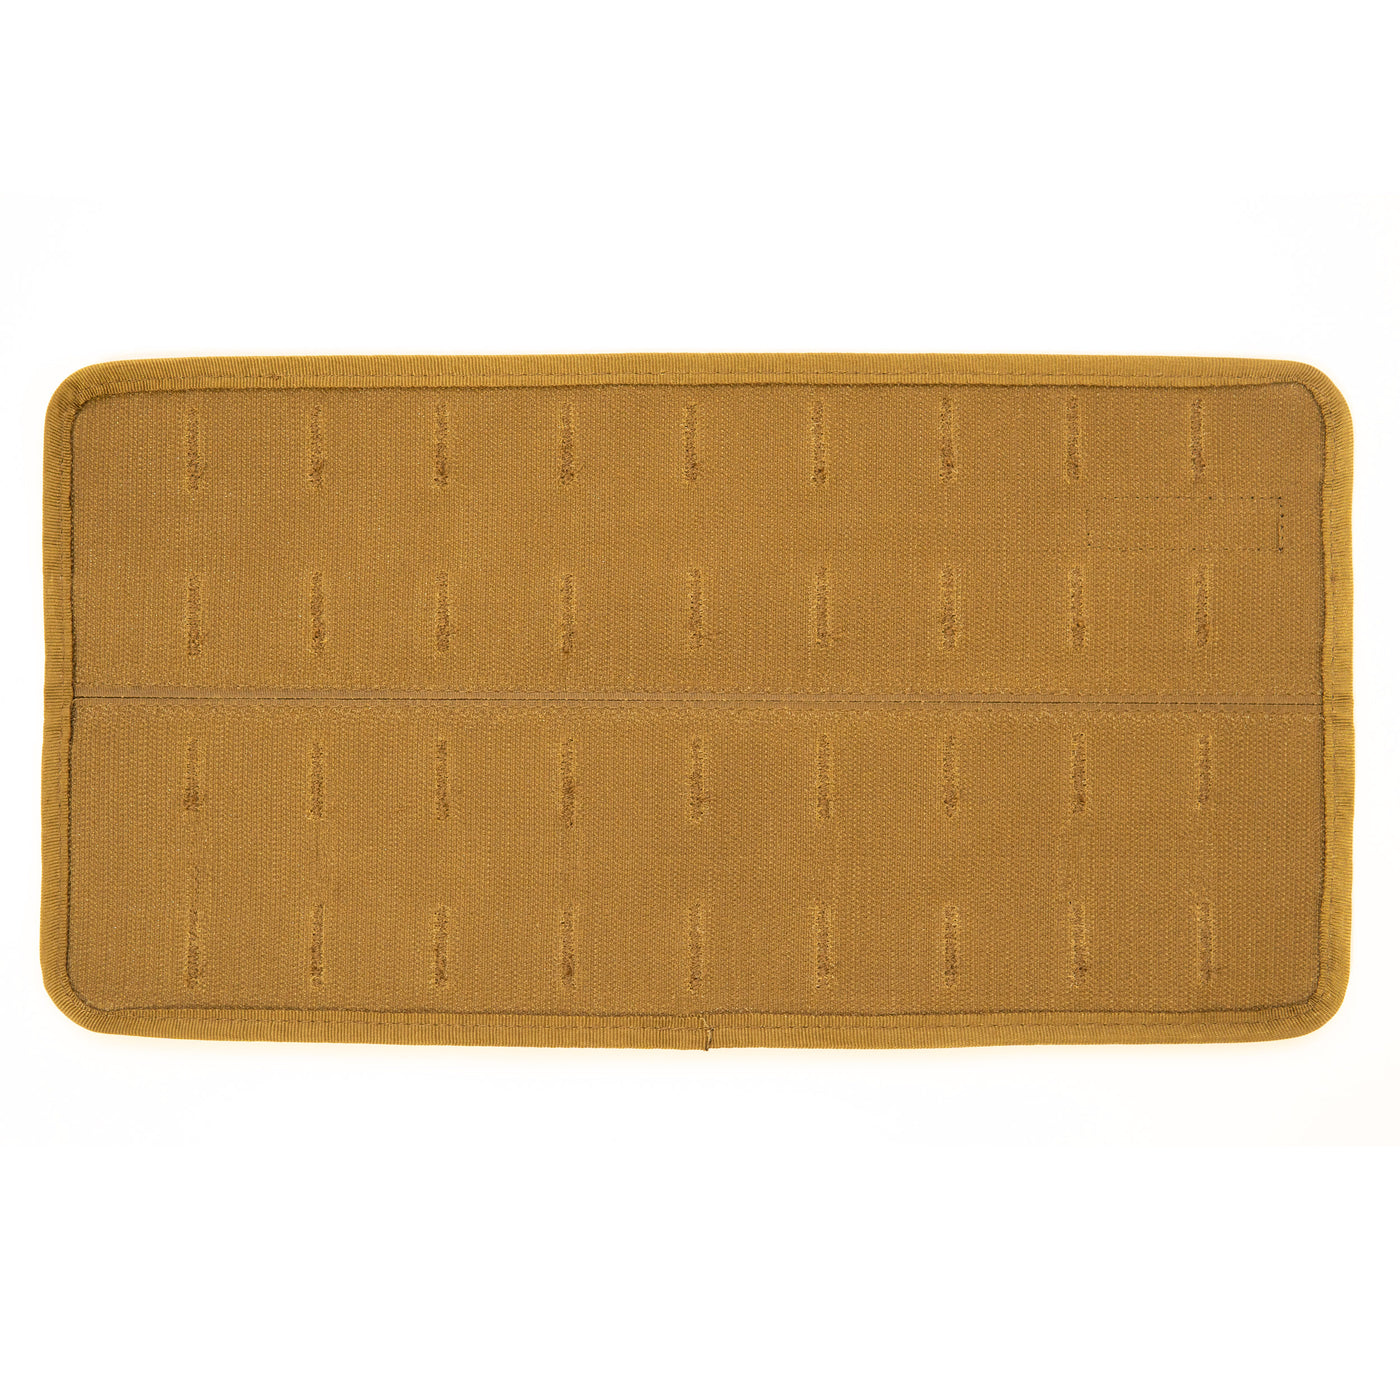 Velcro Tech Panel - Coyote Tan | Large (8" x 15.5")-Interior-BuiltRight Industries